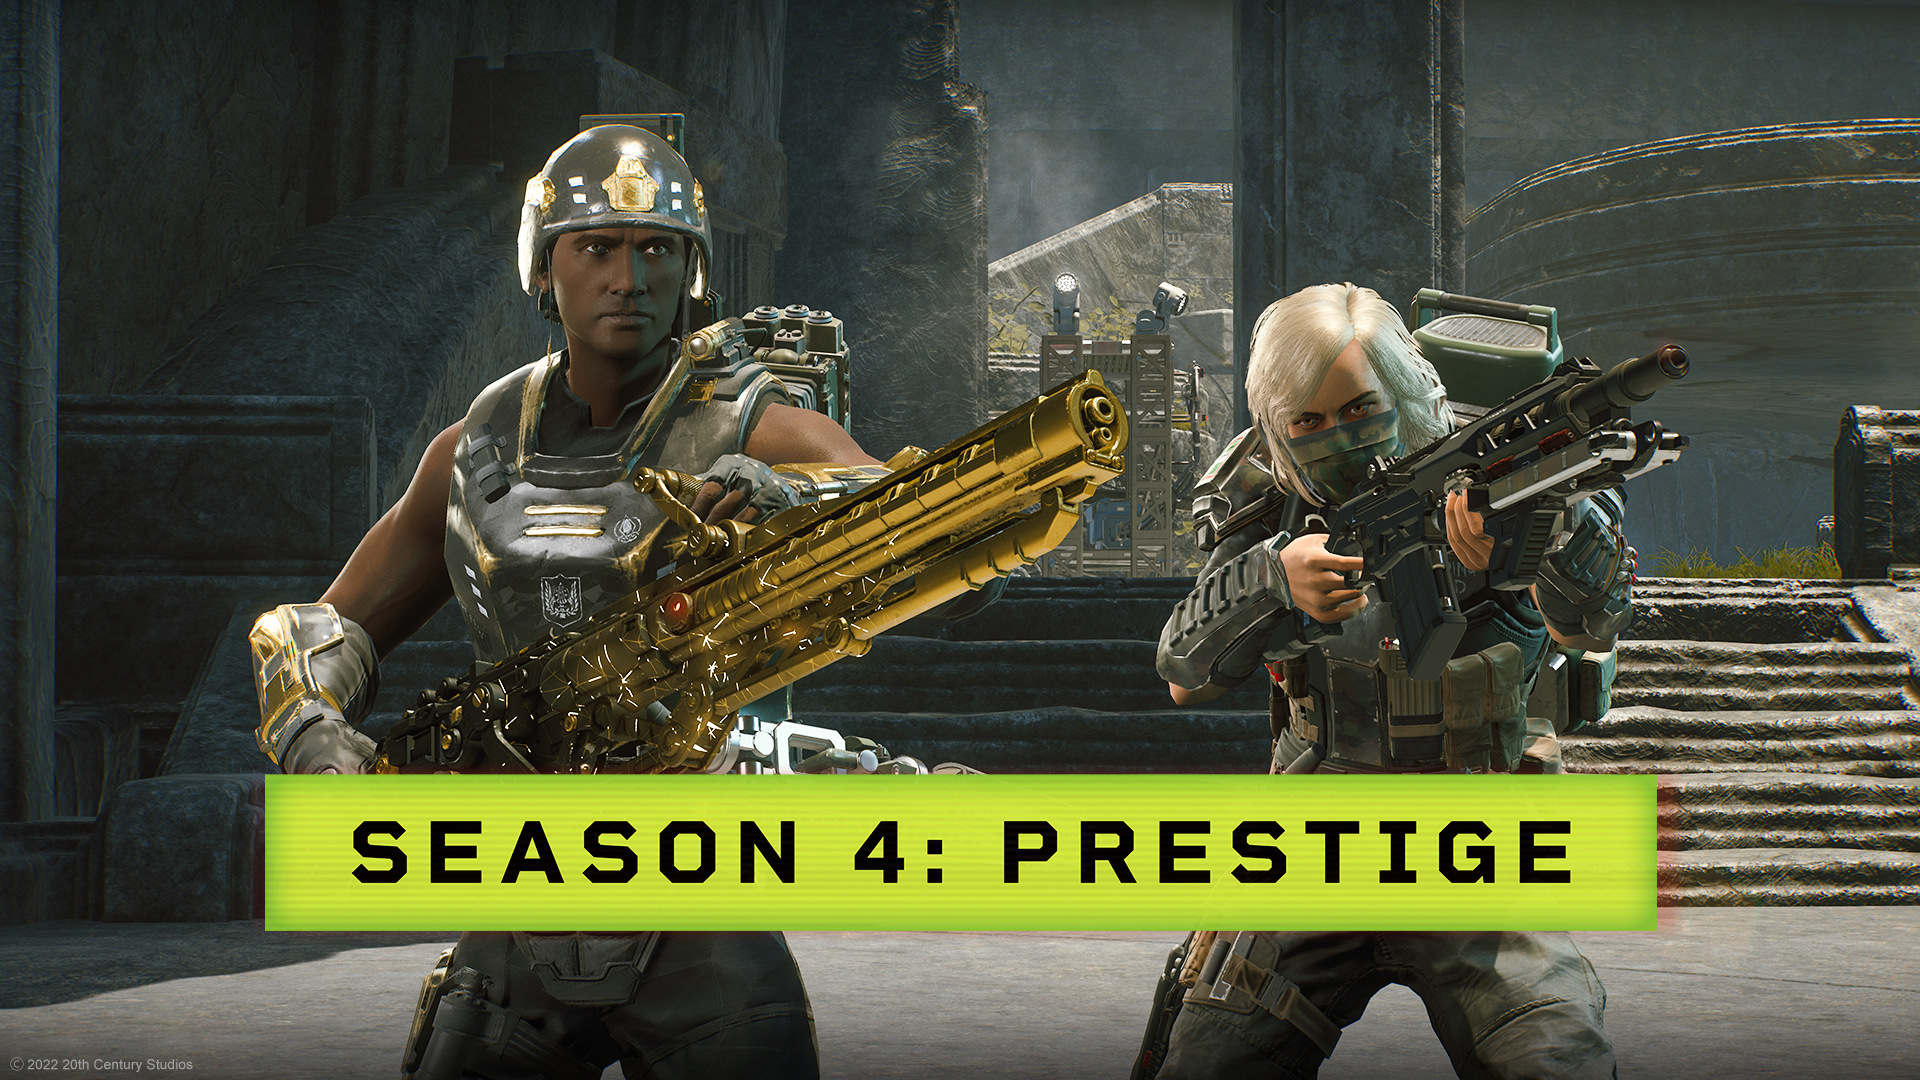 Can a Video Game Be Prestige TV?